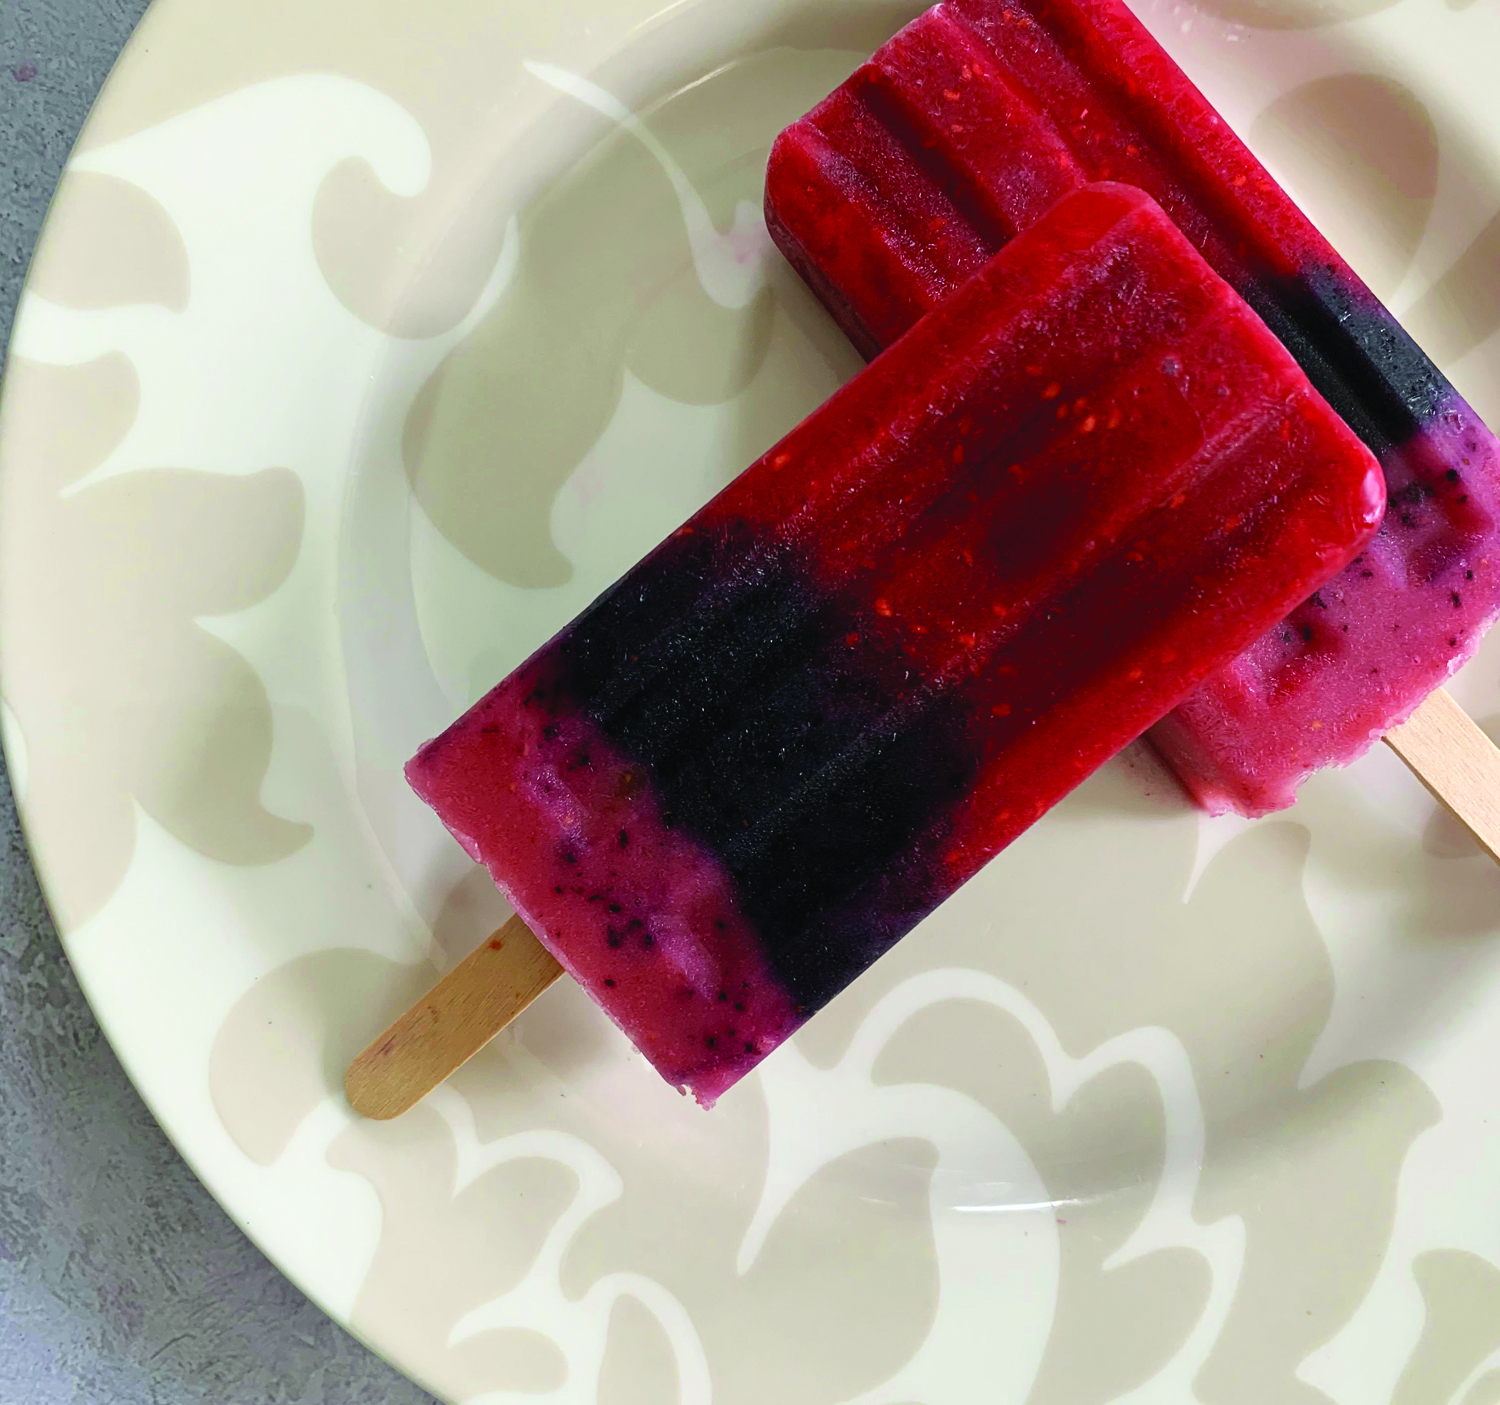 Very Berry Popsicles